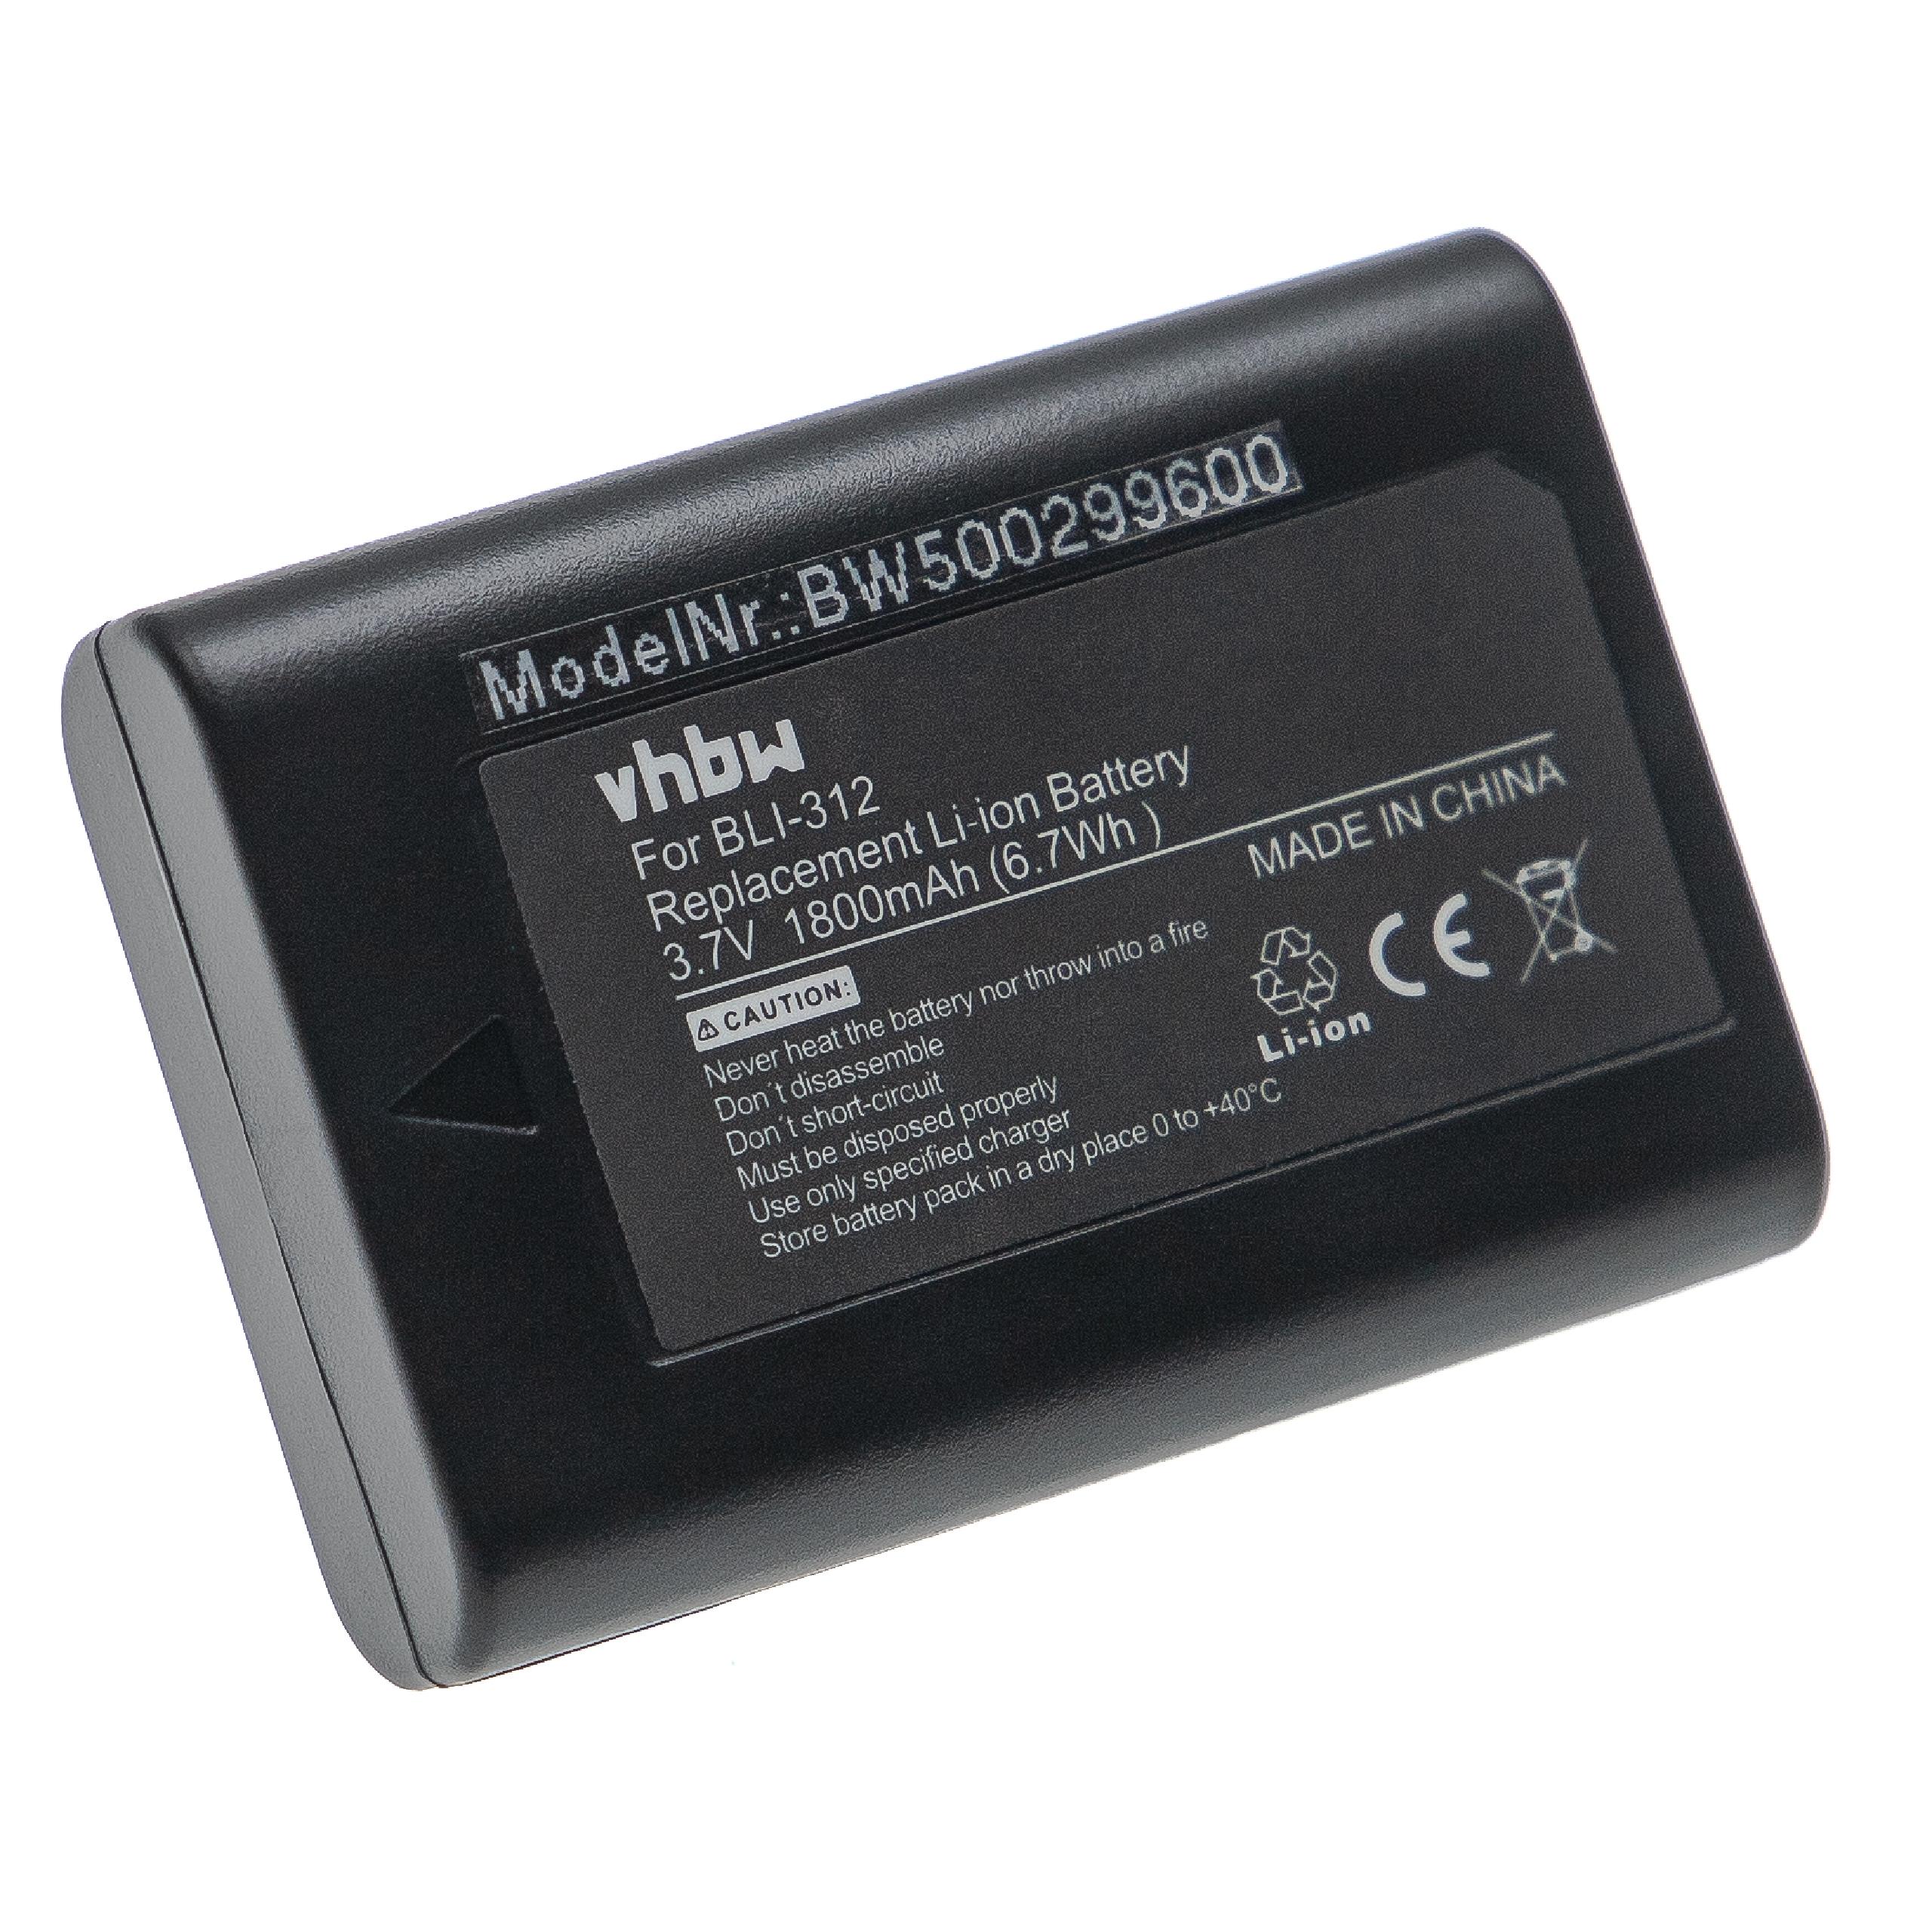 Battery Replacement for Leica 14464 - 1800mAh, 3.7V, Li-Ion